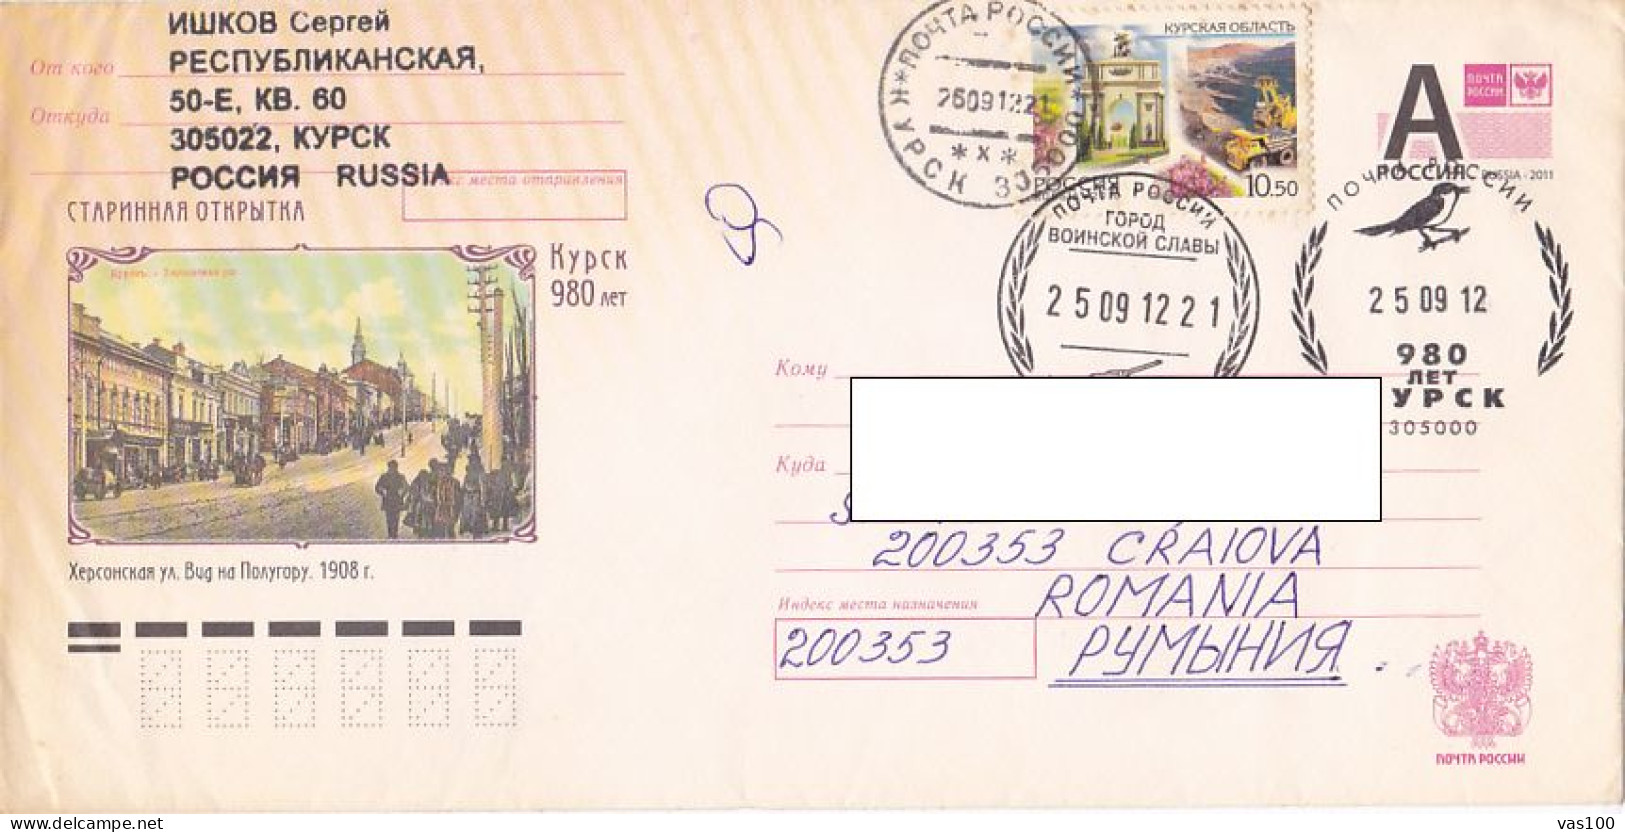 KURSK TOWN, OLD VIEW, COVER STATIONERY, ENTIER POSTAL, 2012, RUSSIA - Entiers Postaux